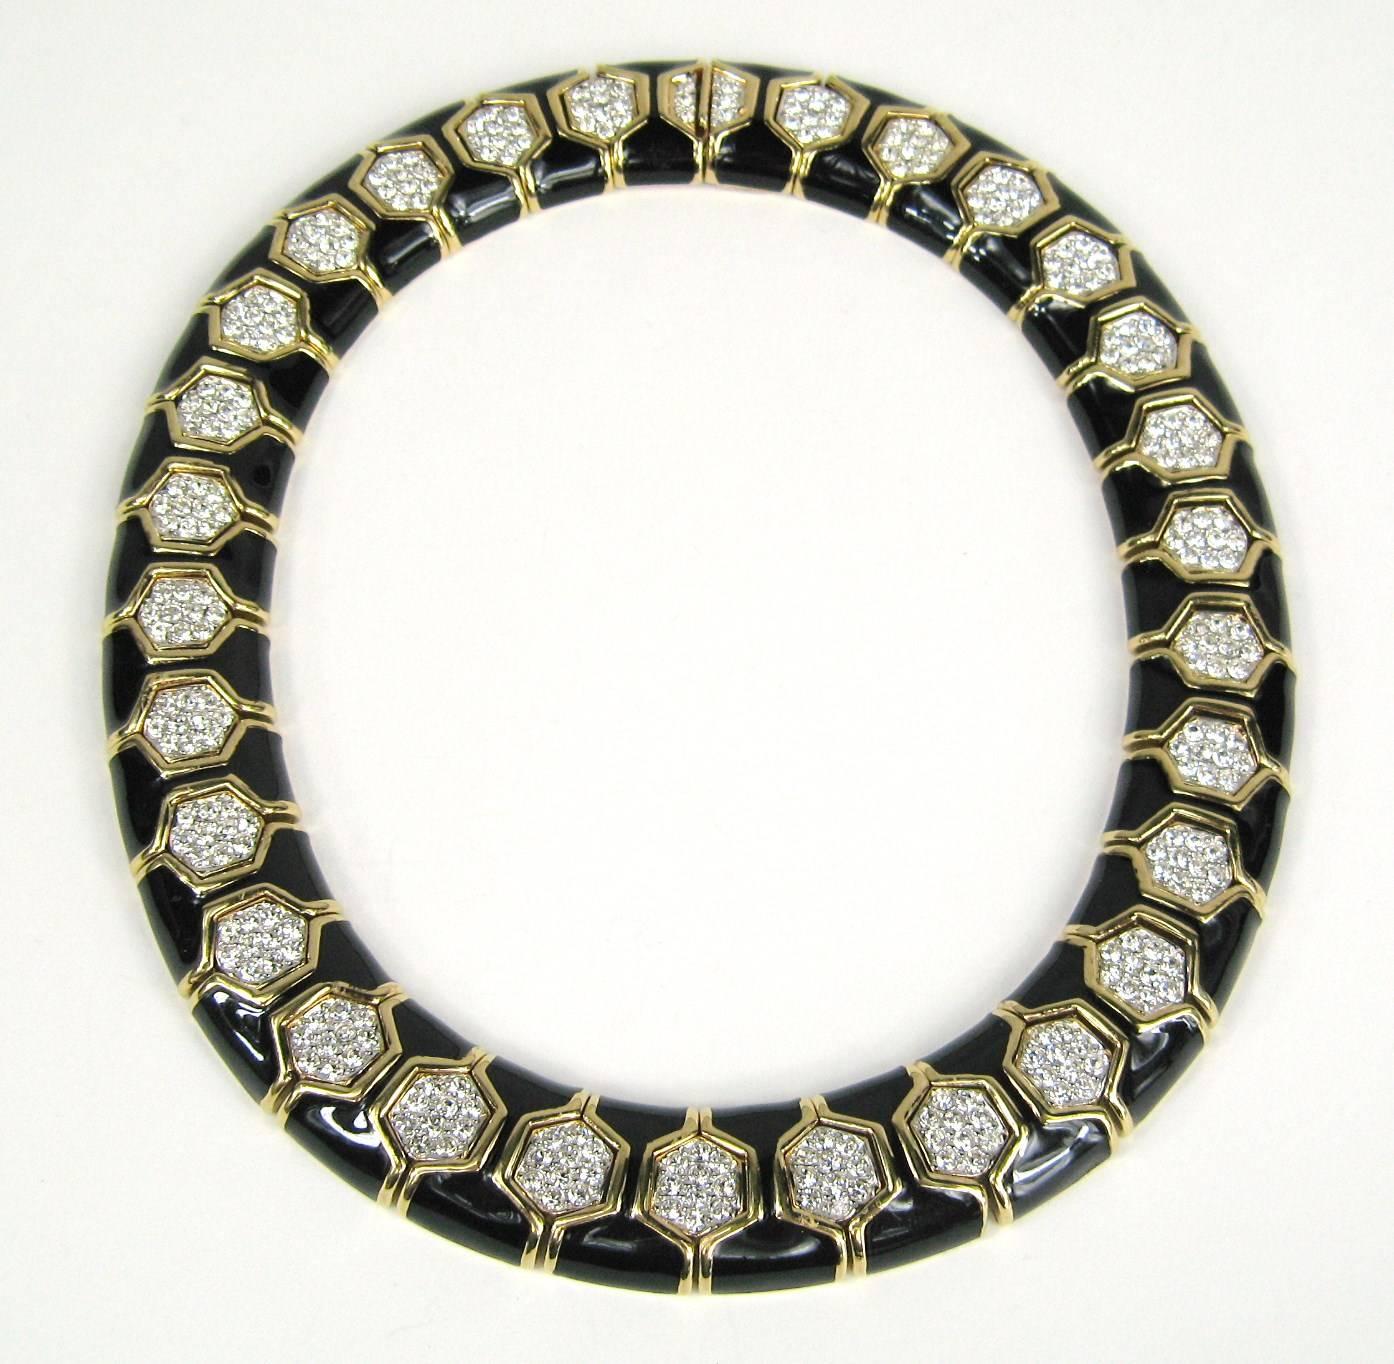 Exquisite Ciner Enamel & Swarovski Crystal Choker Necklace, with Swarovski crystals - Never Worn. Measuring .80 in. x 15 in. long. Slide in clasp. This is New Old Stock, never worn. We have tons more Ciner as well as hundreds of other pieces for